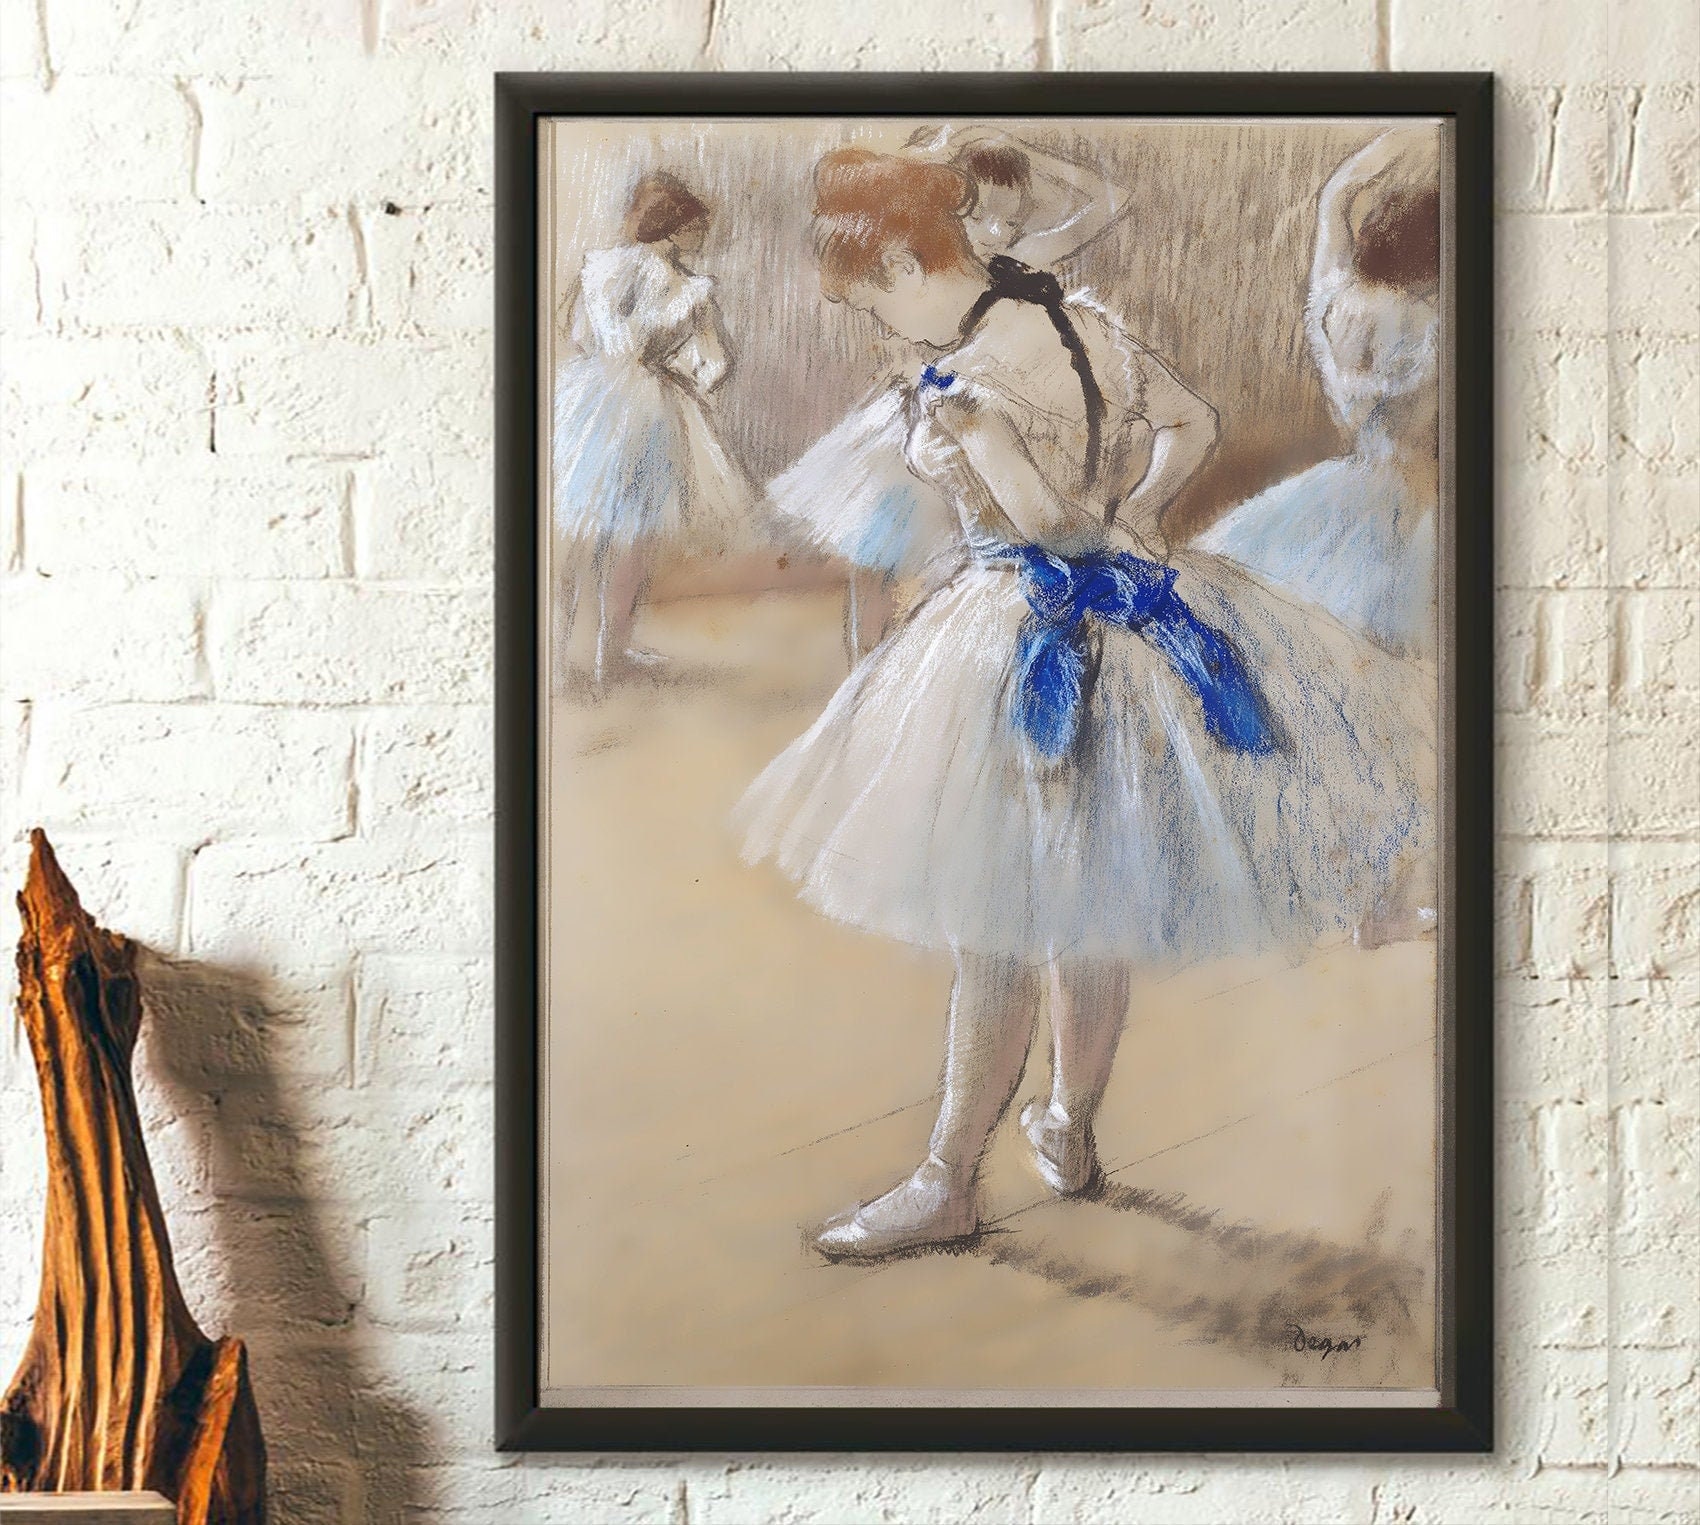 Edgar Degas Drawing Reproduction: Standing Dancer With Right Arm